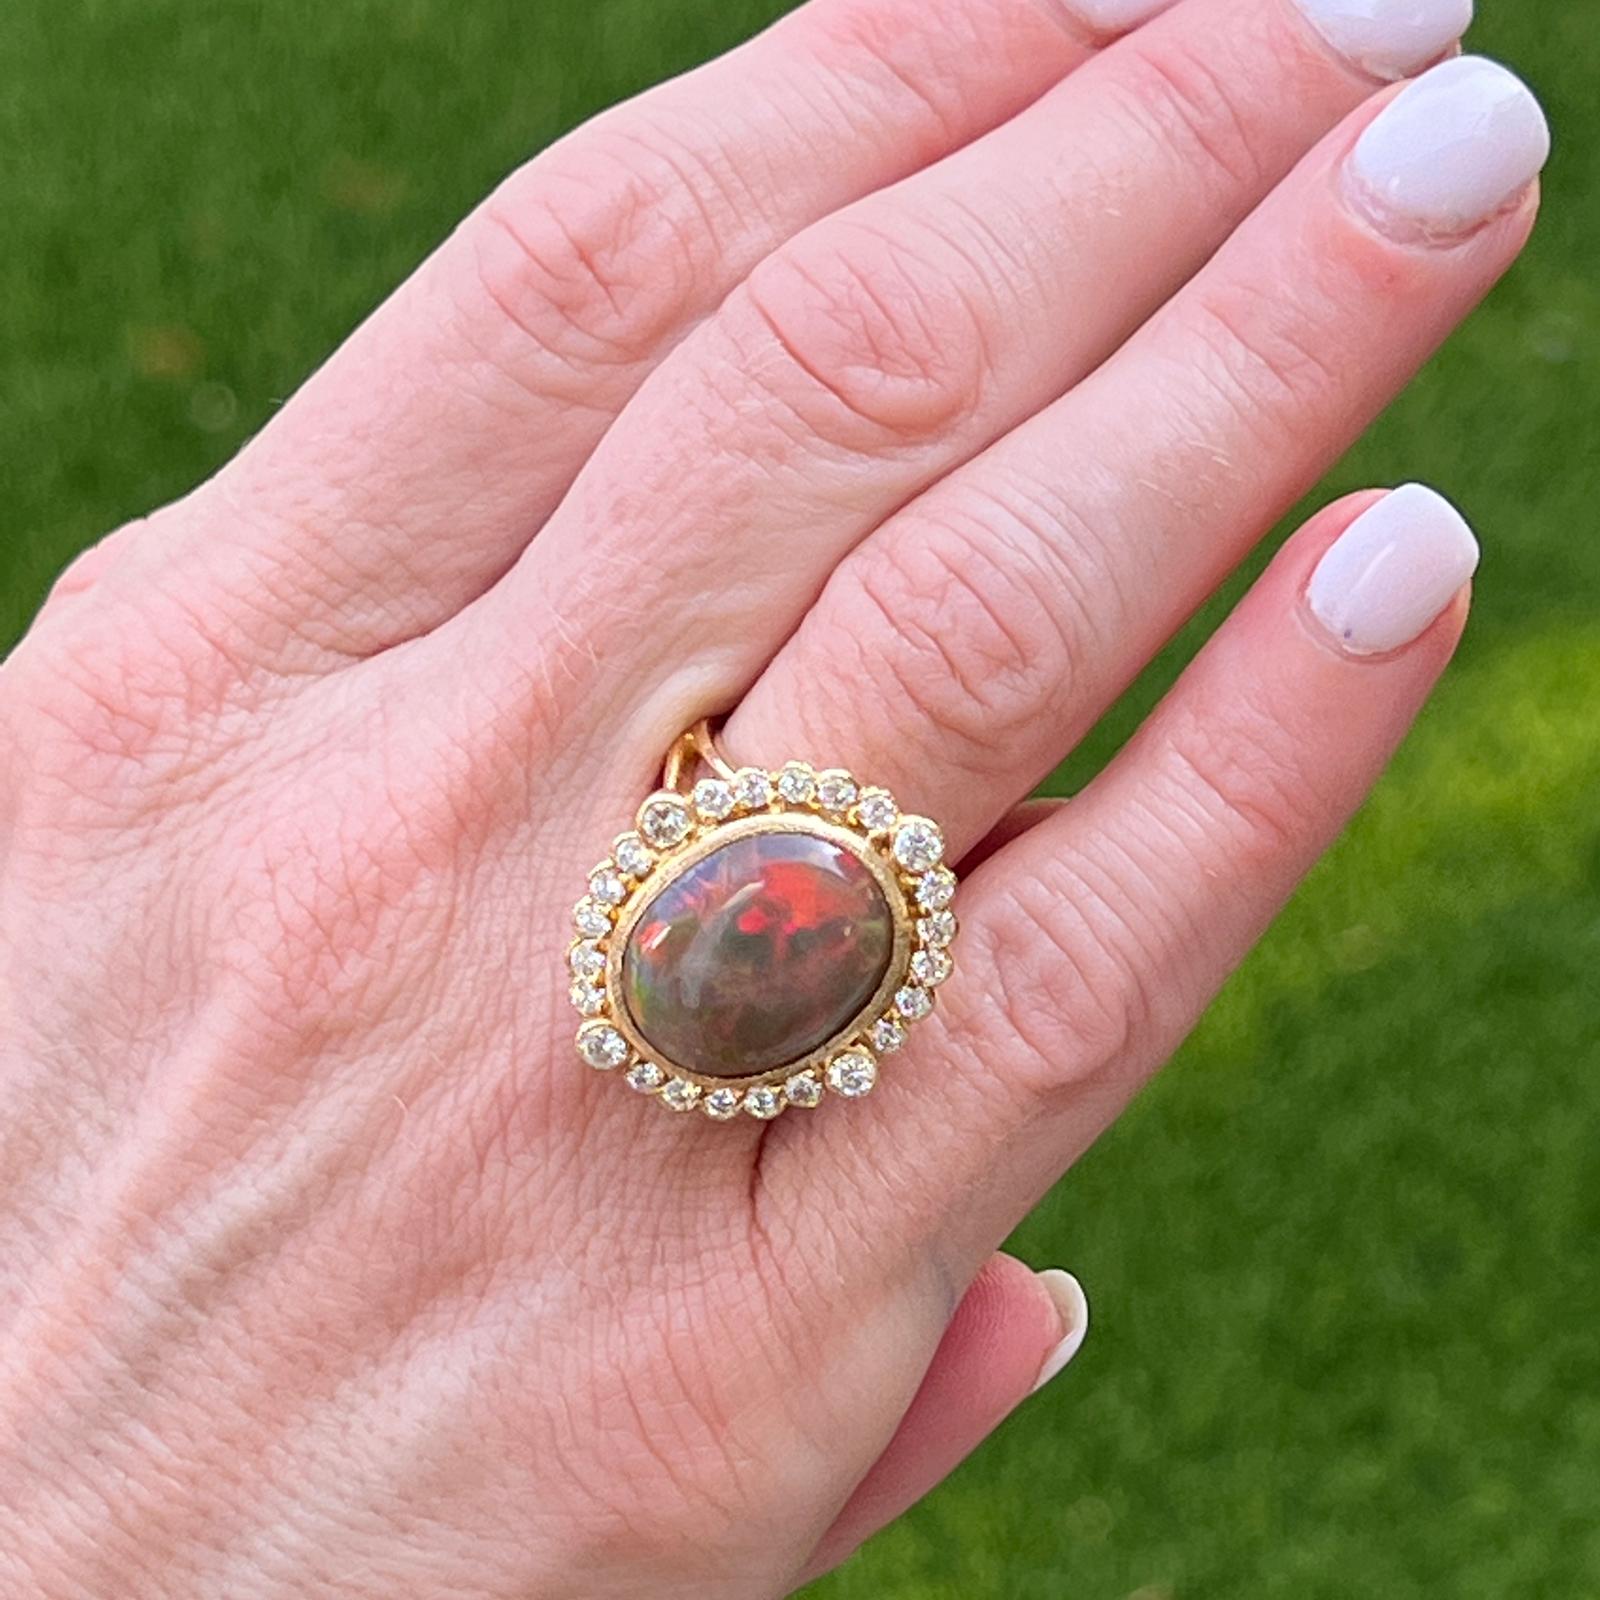 Beautiful opal diamond cocktail ring fashioned in 18 karat yellow gold. The cabochon cut fiery opal weighs approximately 8 carats and features sparkles of orange, green, and blue hues. The opal is surrounded by 24 round brilliant cut diamonds